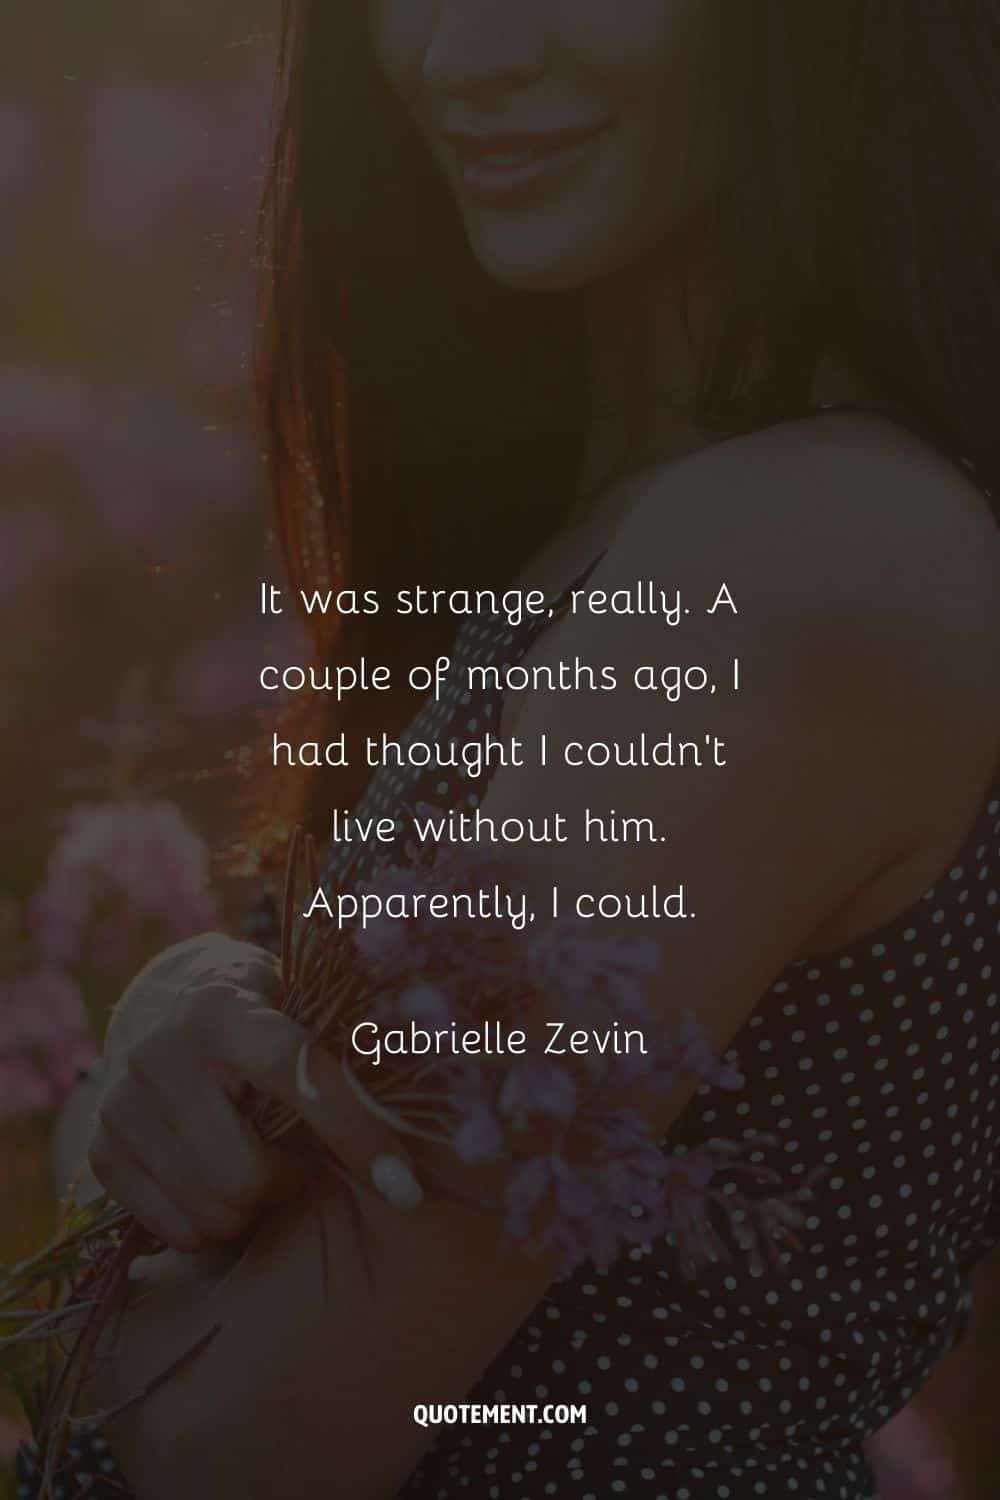 “It was strange, really. A couple of months ago, I had thought I couldn’t live without him. Apparently, I could.” ― Gabrielle Zevin